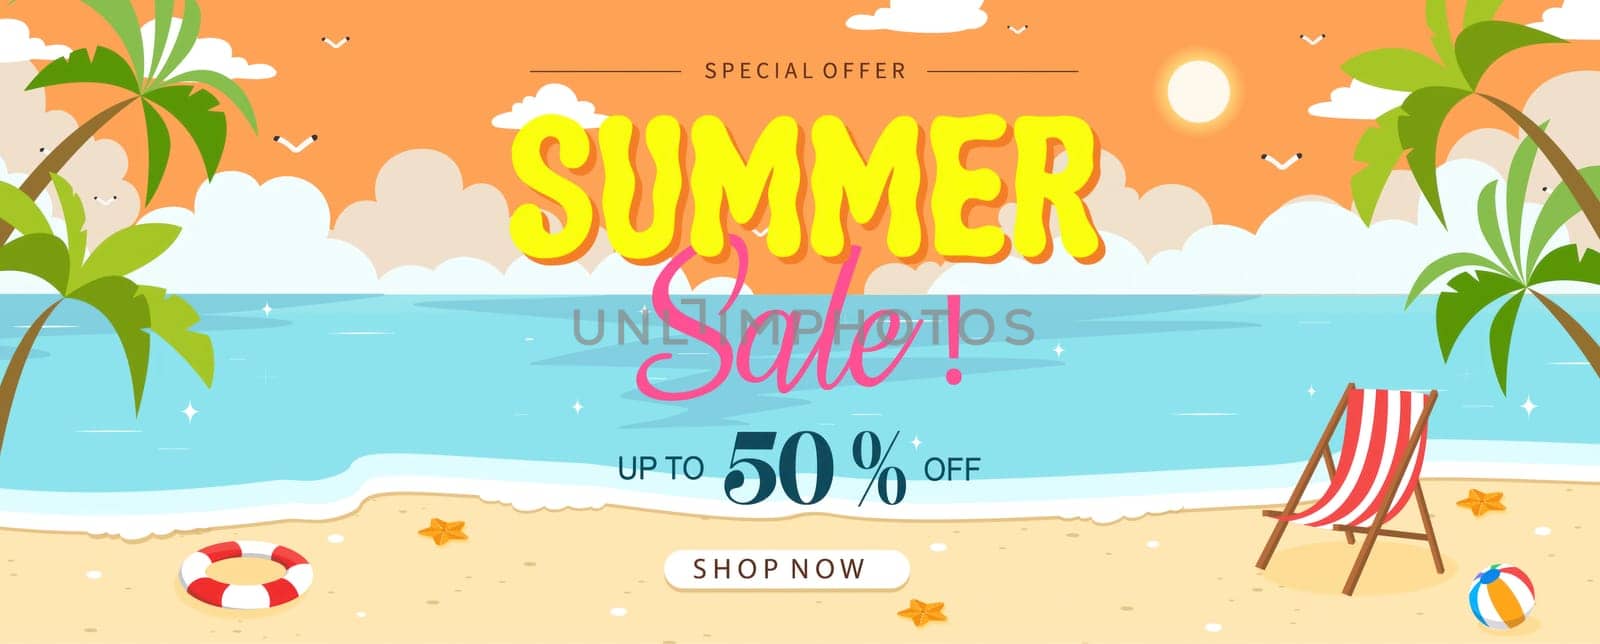 Summer sale promotion banner. Sunset beach with ocean wave, inflatable ring, star fish, parasol and tropical leaves on sand. by meepiangraphic